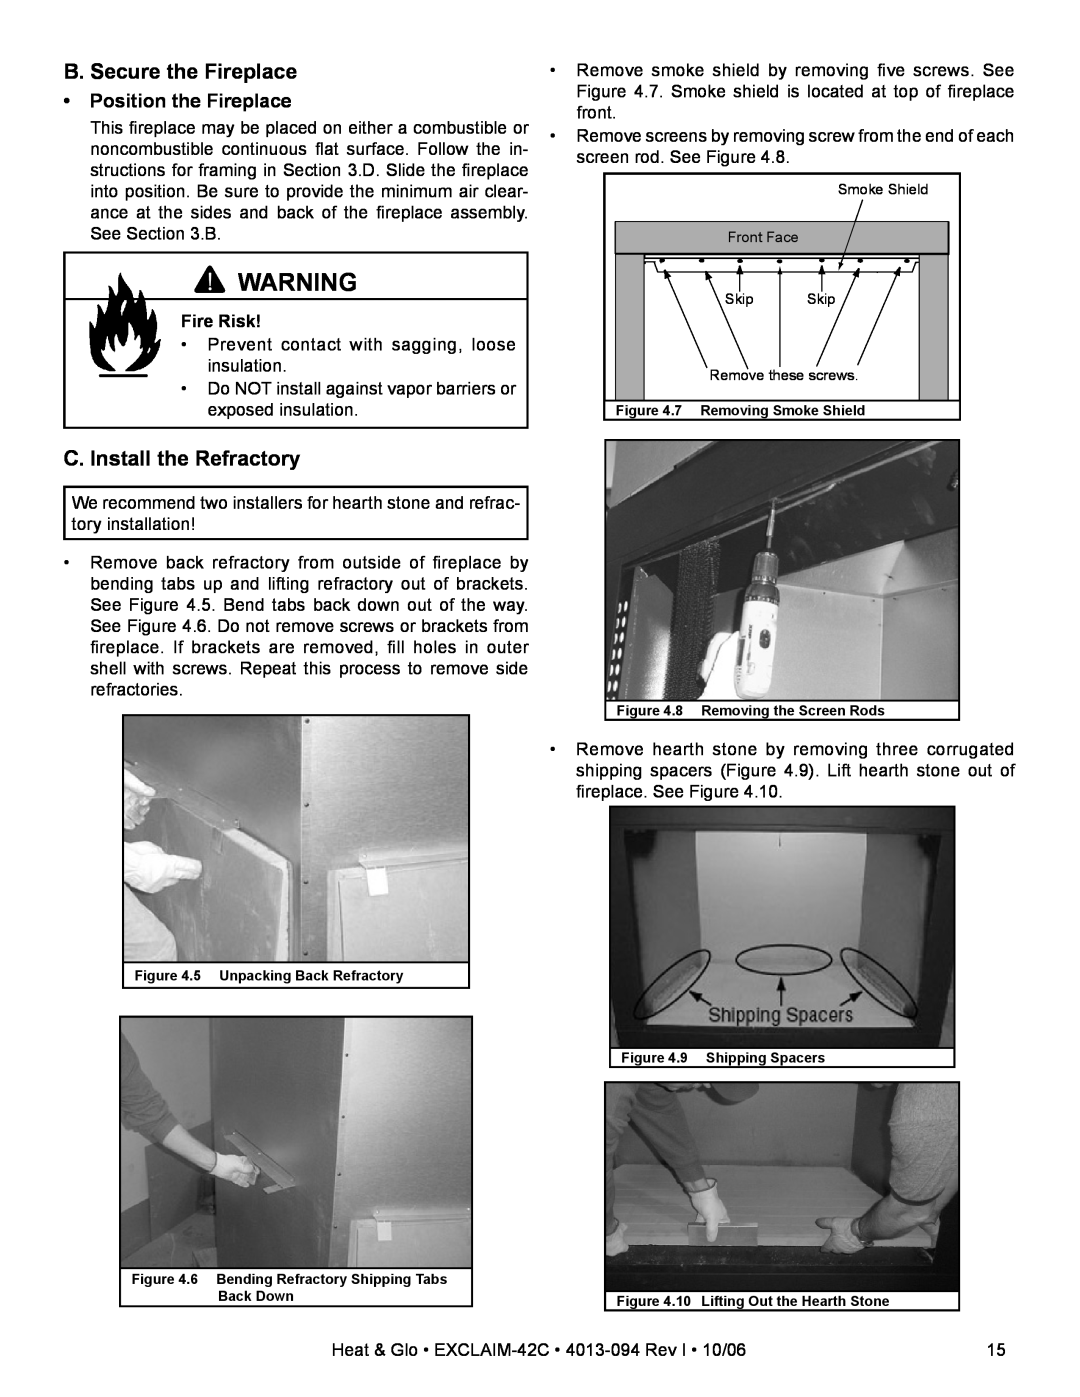 Heat & Glo LifeStyle EXCLAIM-42T-C B. Secure the Fireplace, C. Install the Refractory, Position the Fireplace, Fire Risk 